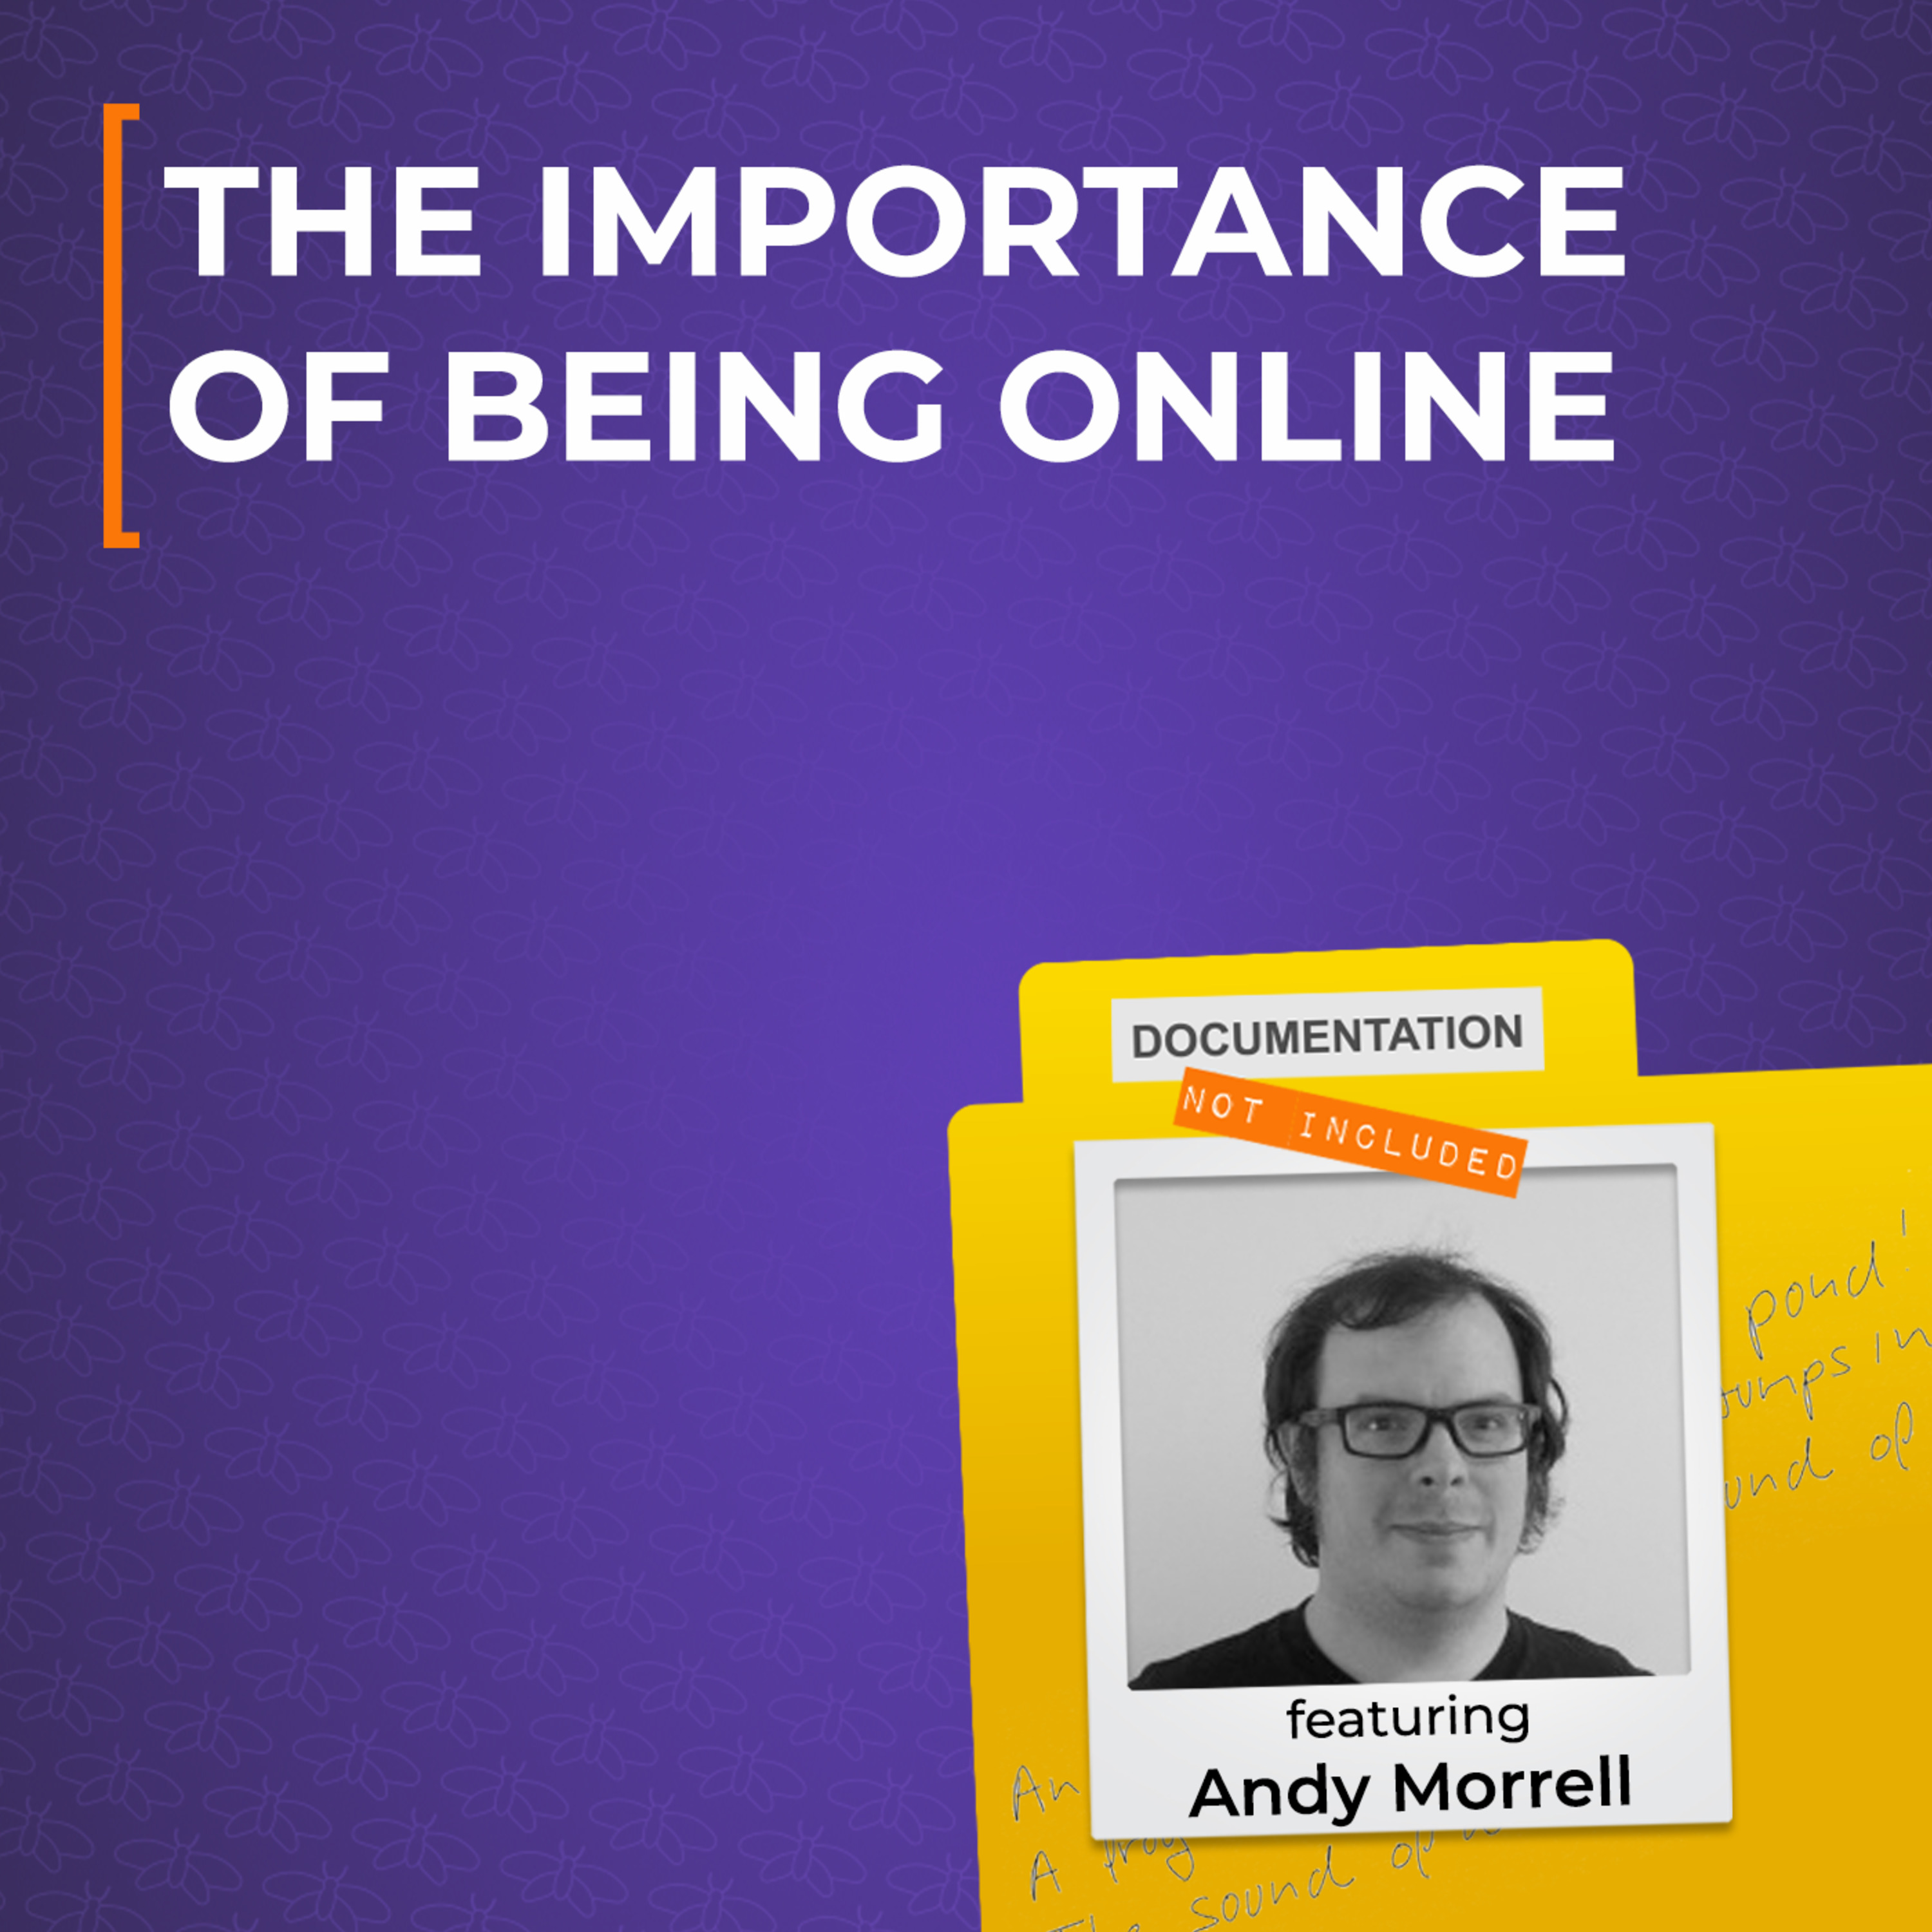 The Importance of Being Online